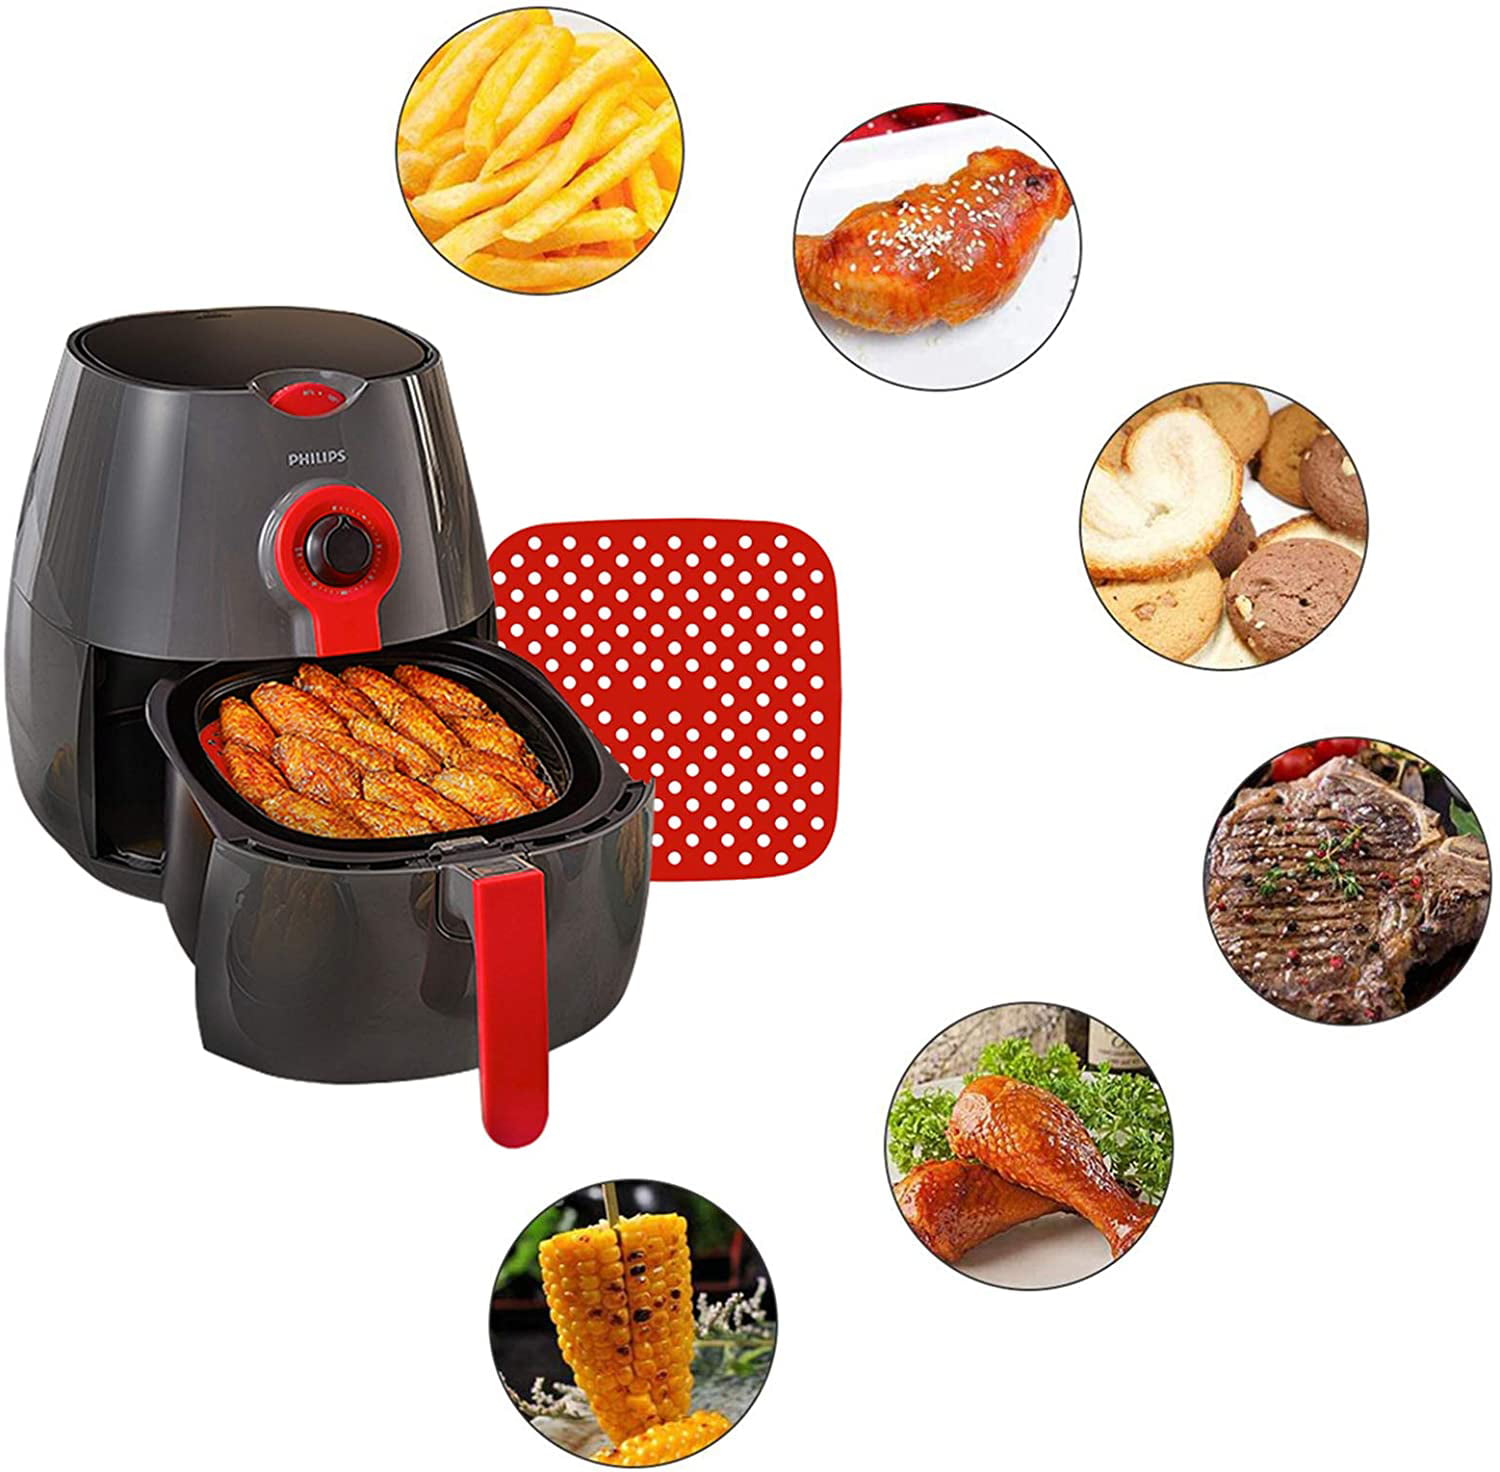 Air Fryer Accessories 12 pcs Compatible with Ninja, Power XL, Gourmia +  more, 100pcs Parchment Paper Liners, Silicone Mat, Stainless Steel Rack